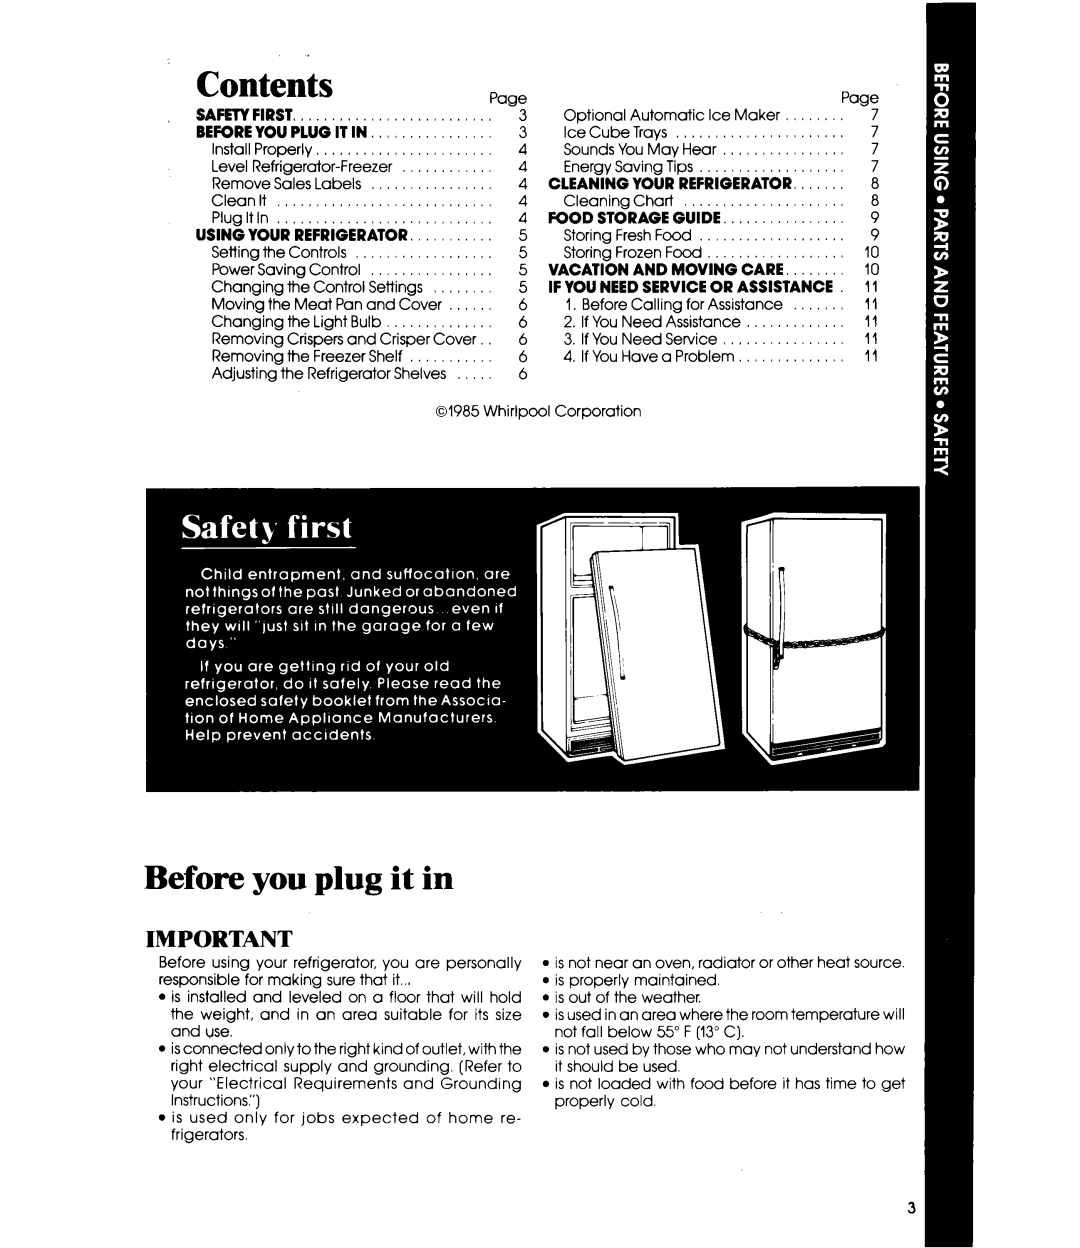 Whirlpool ETl6XK manual Contents, Before you plug it in 